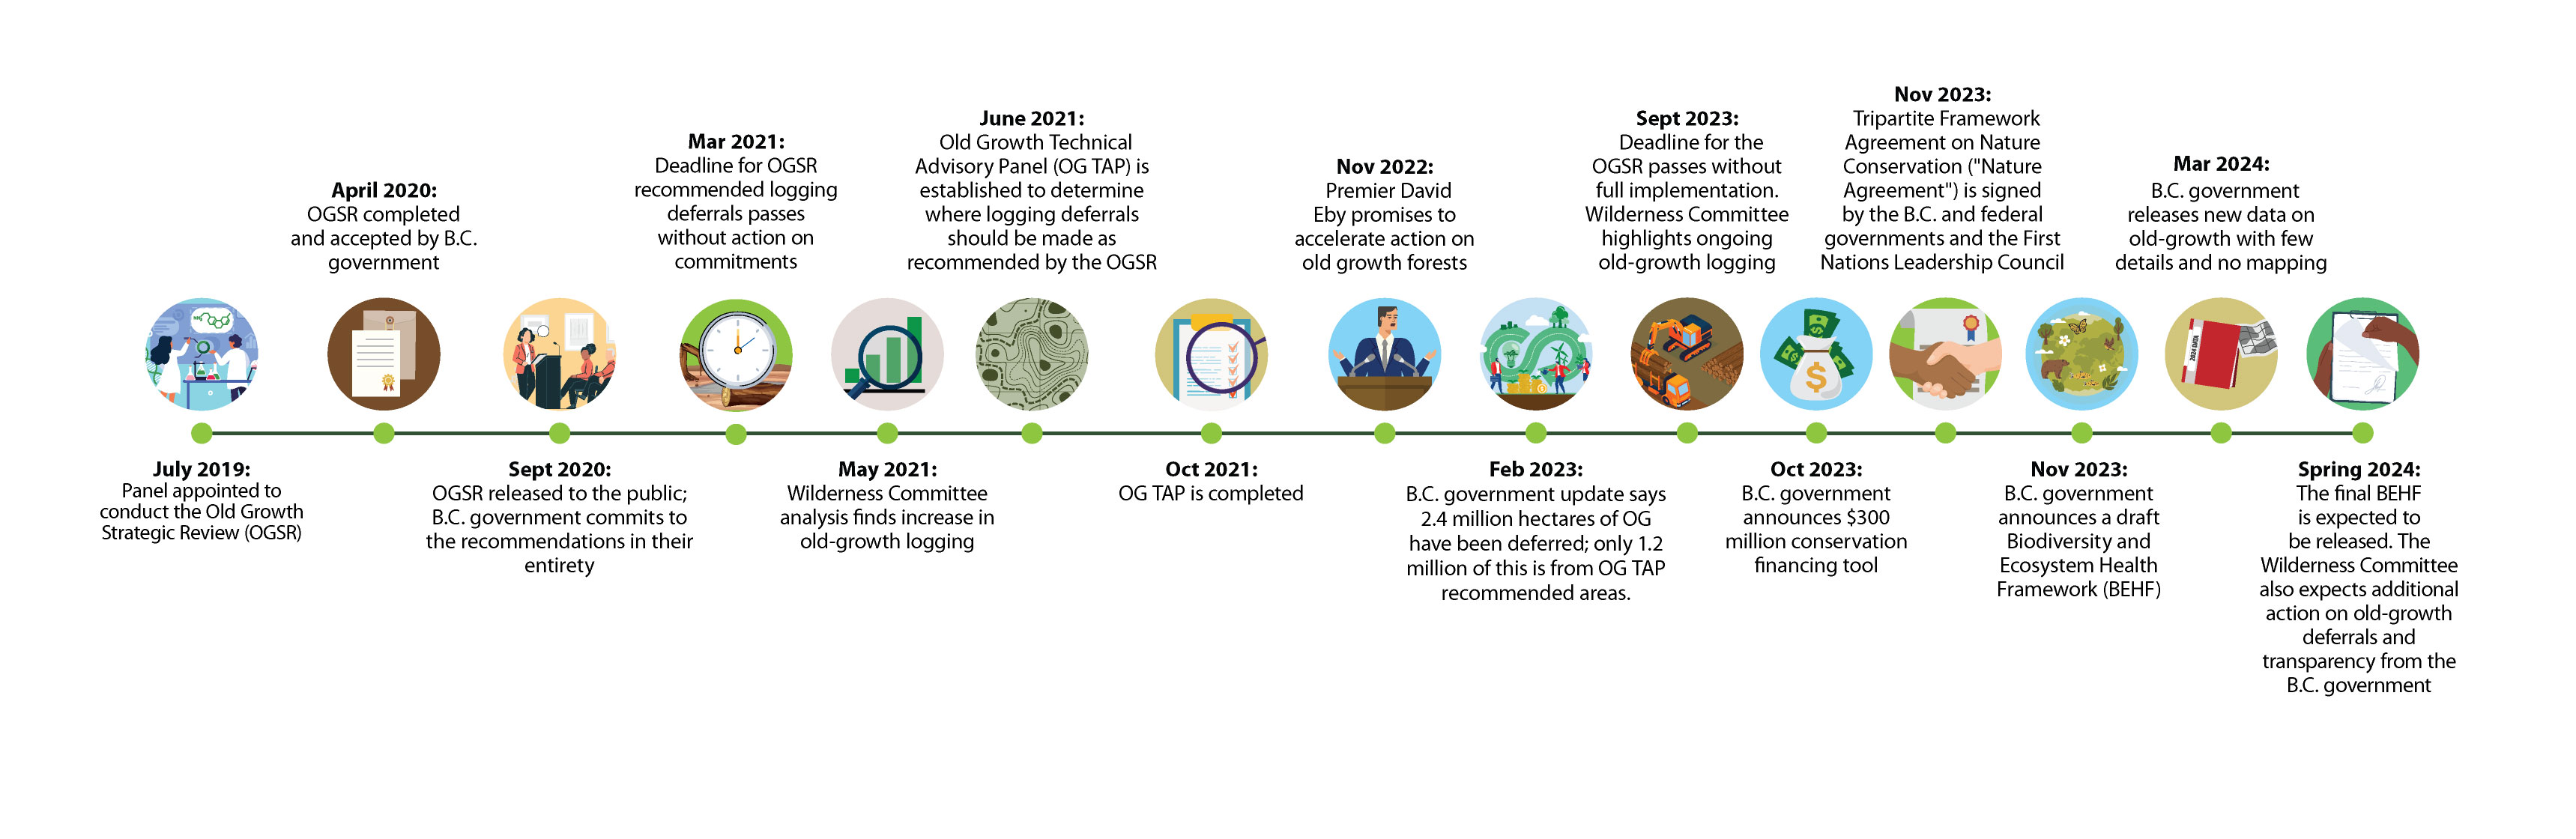 A timeline showing how not much has changed for old-growth protections in BC. End of image description.